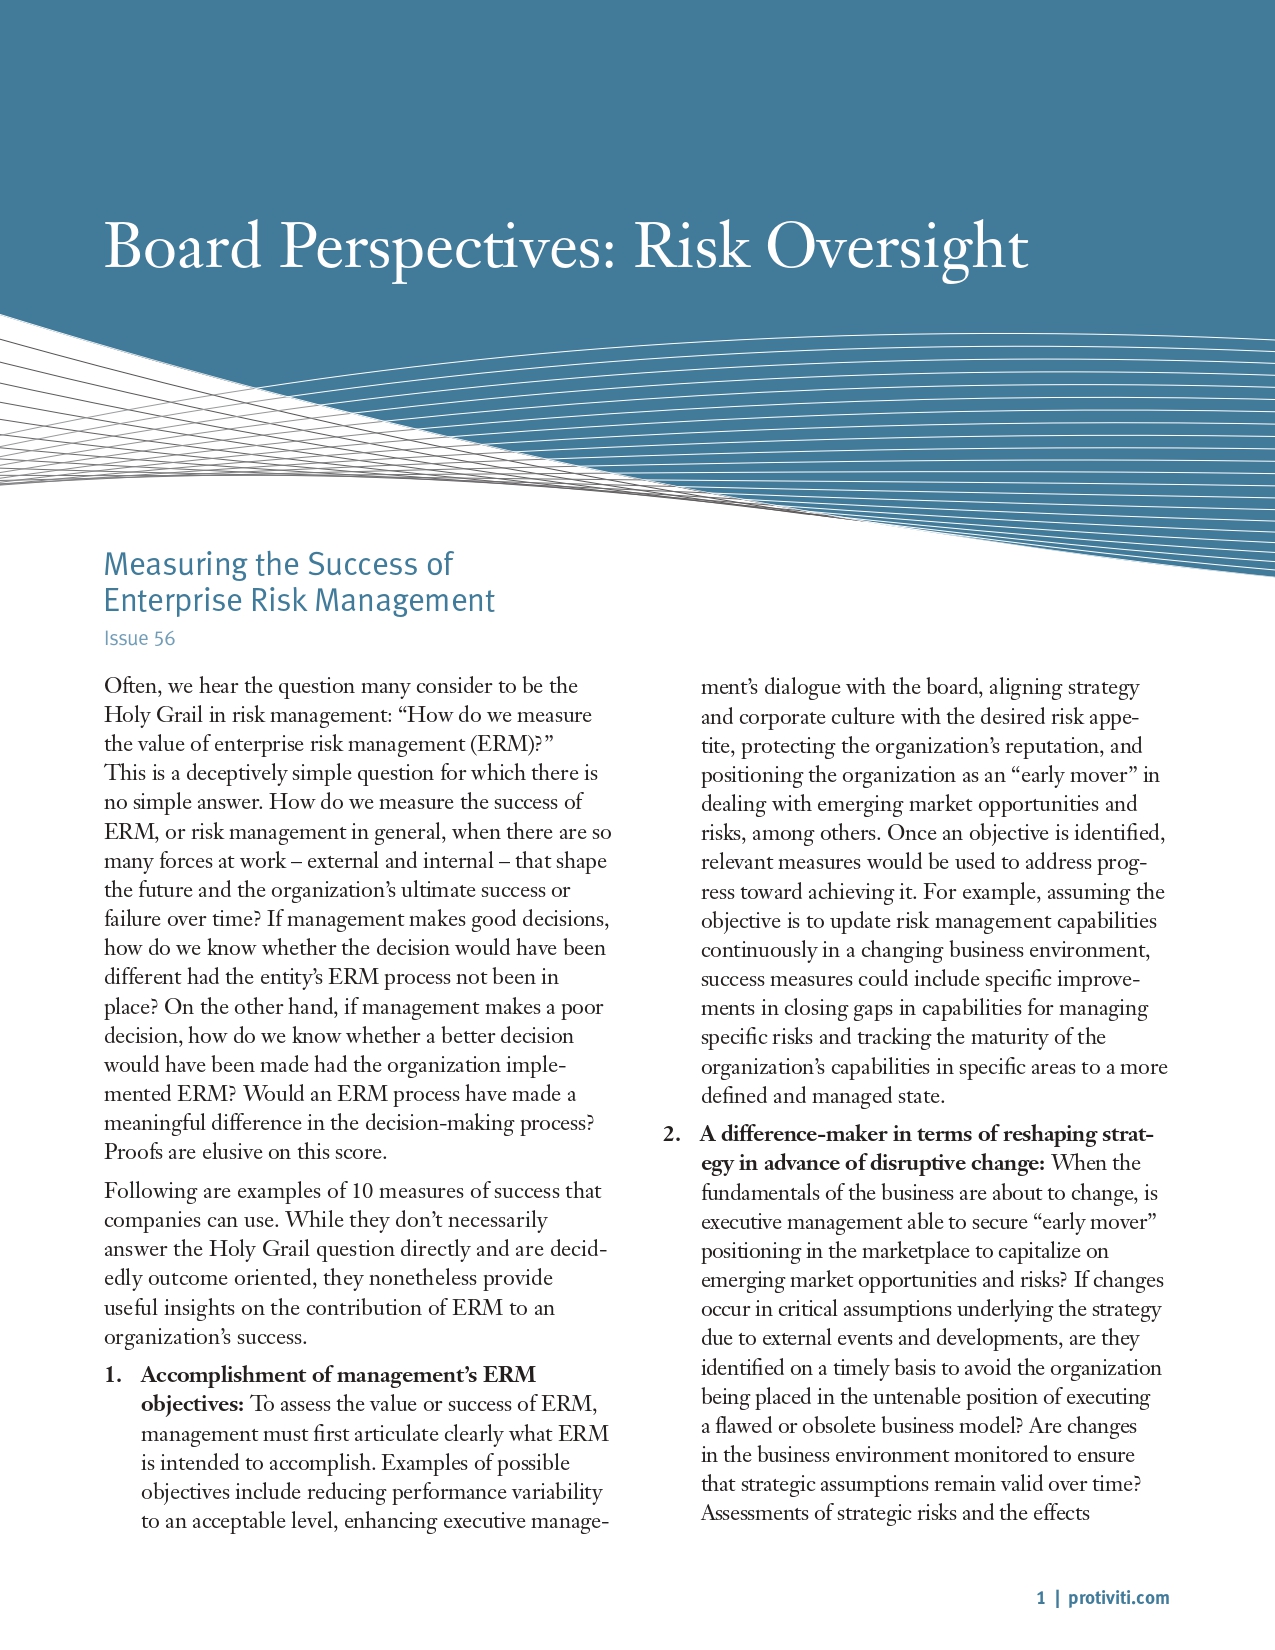 Screenshot of the first page of Measuring the Success of Enterprise Risk Management